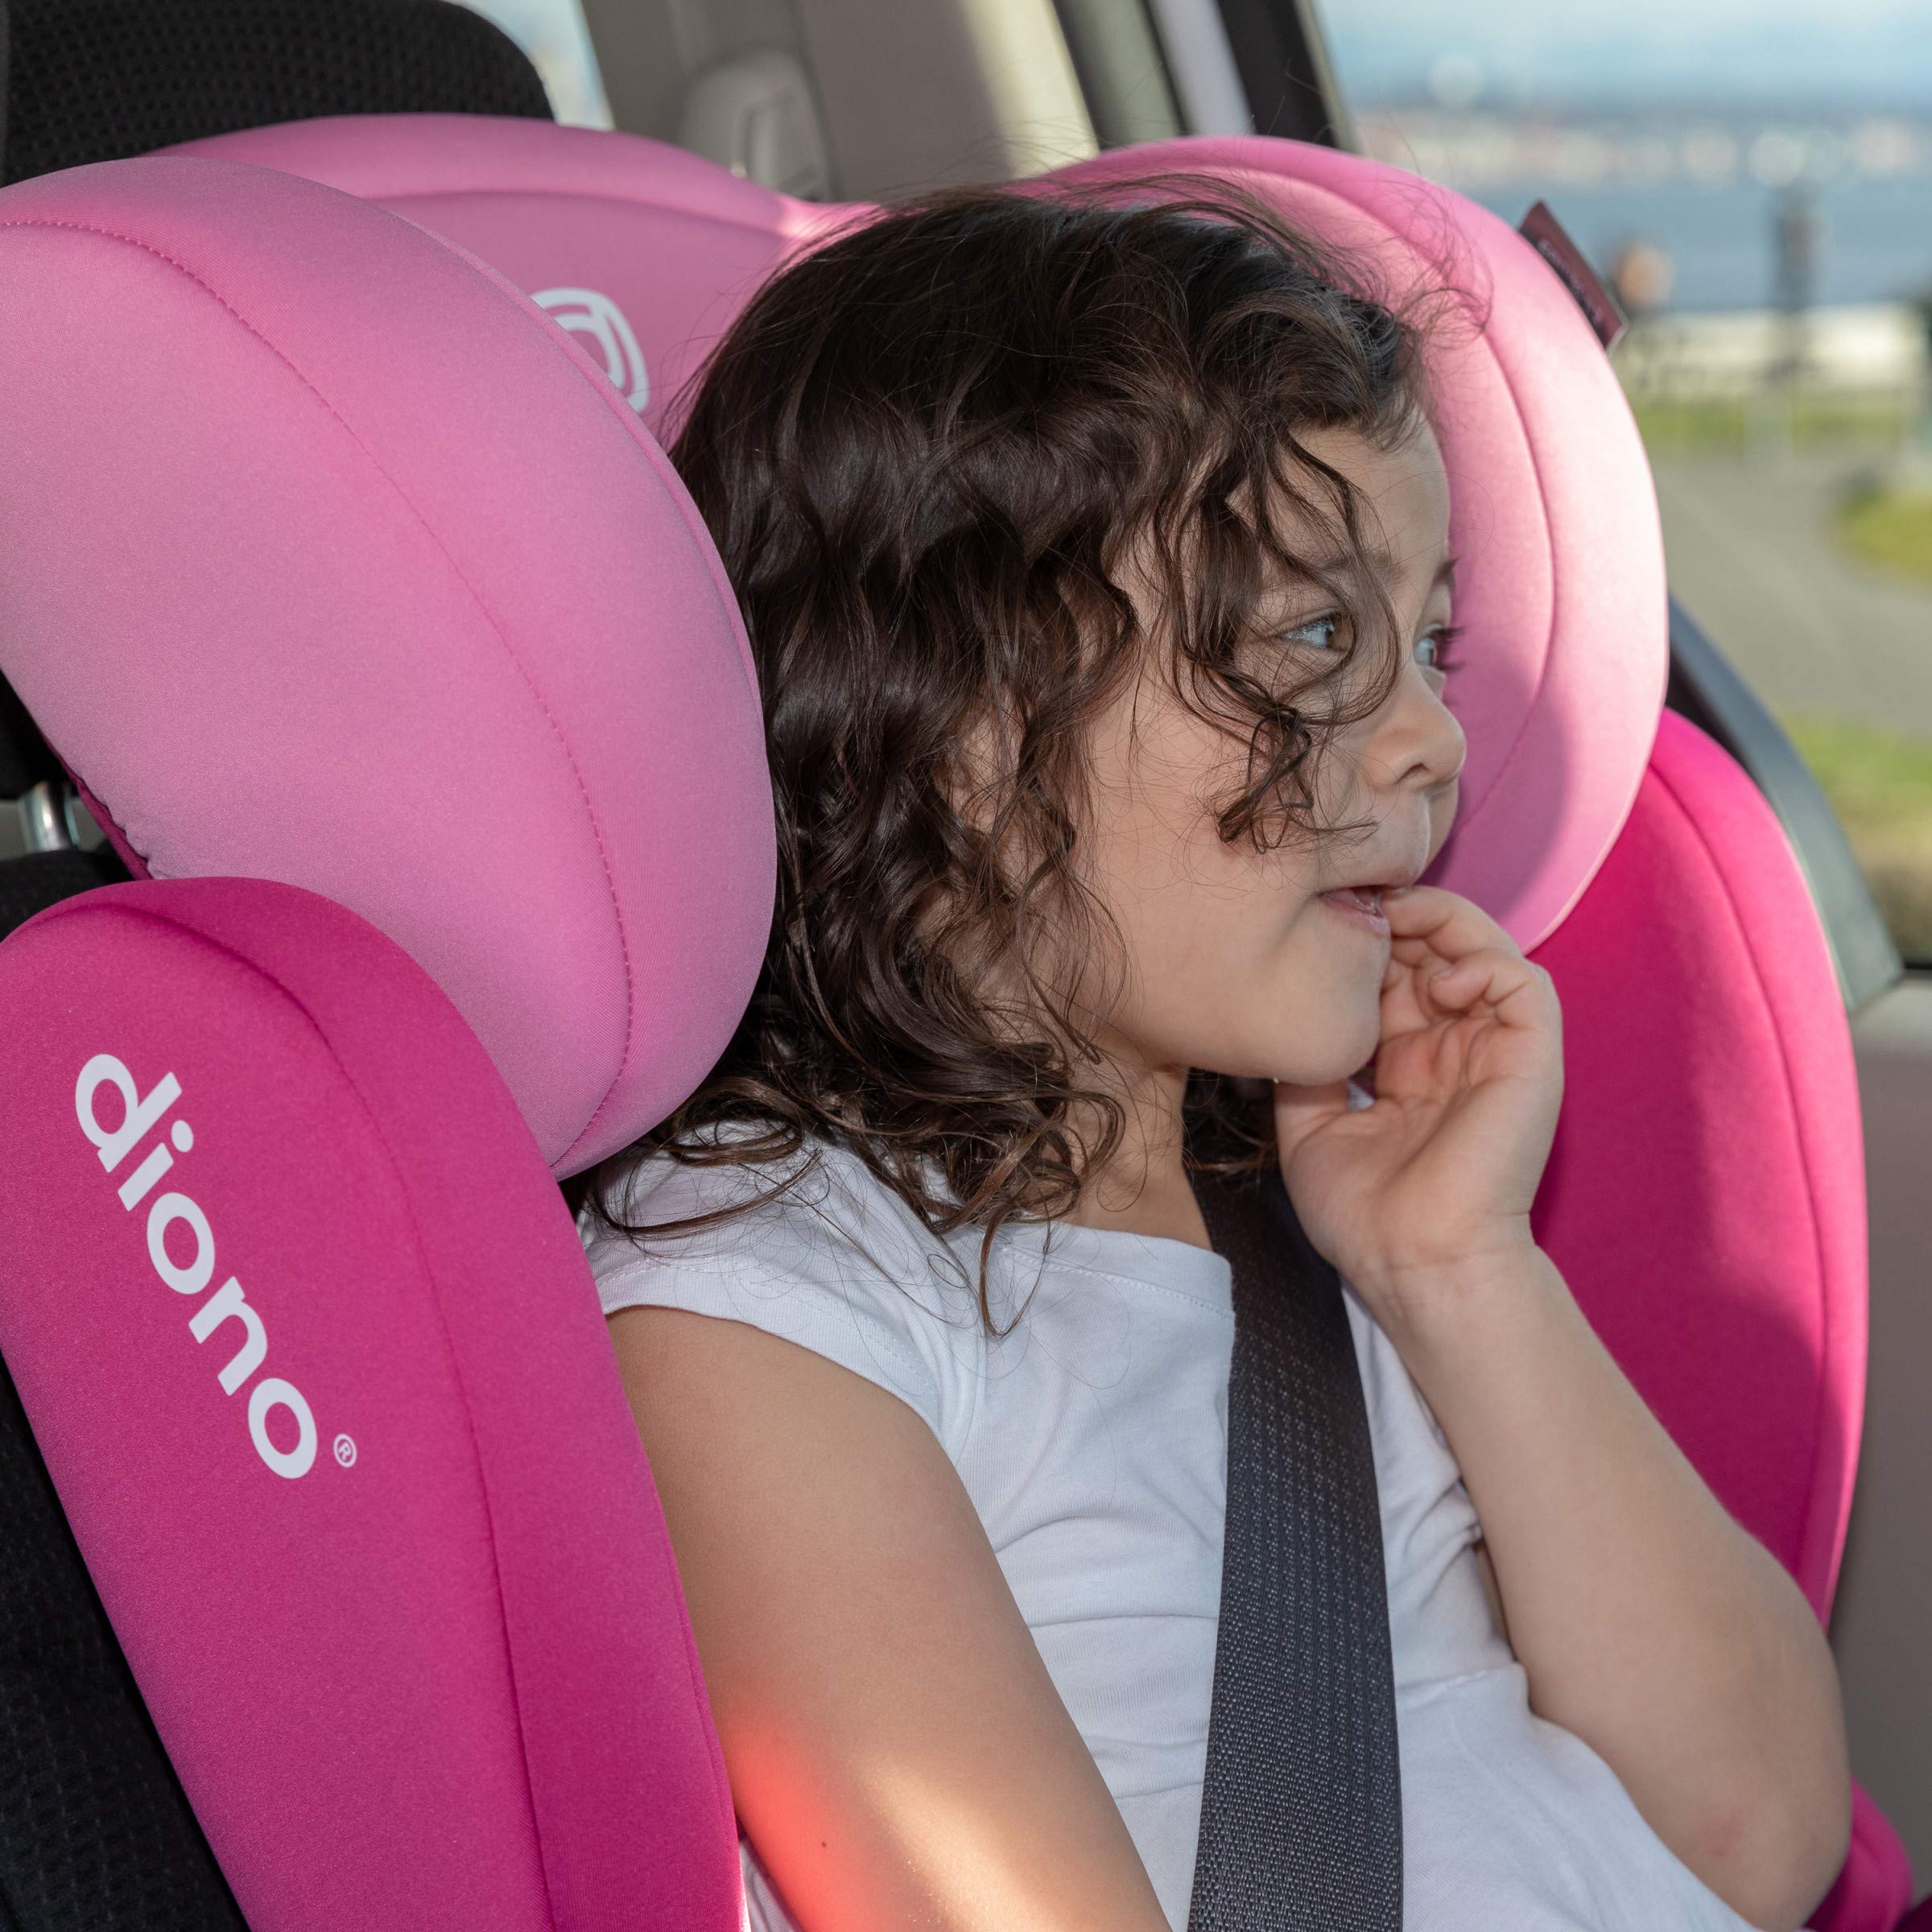 Diono Cambria 2 XL, Dual Latch Connectors, 2-in-1 Belt Positioning Booster Seat, High-Back to Backless Booster with Space and Room to Grow, 8 Years 1 Booster Seat, Pink